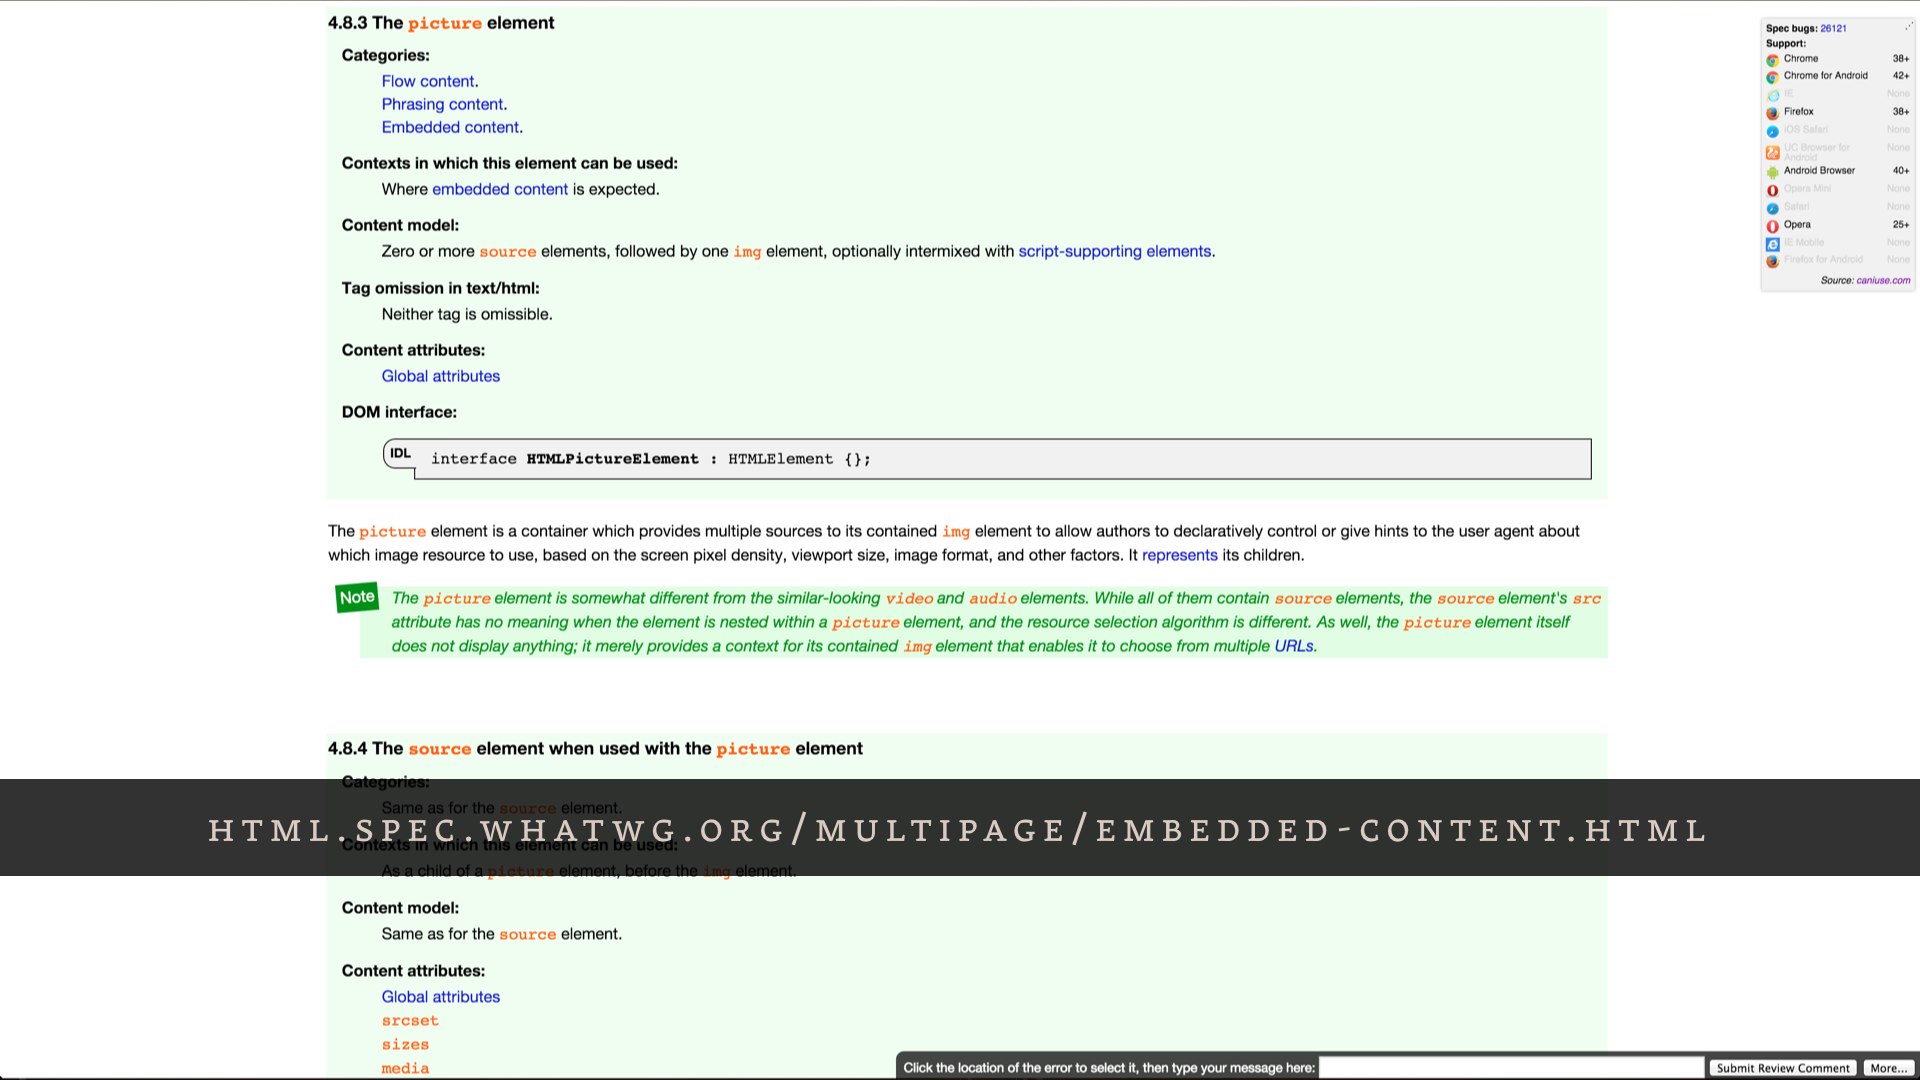 Screenshot of the HTML specification